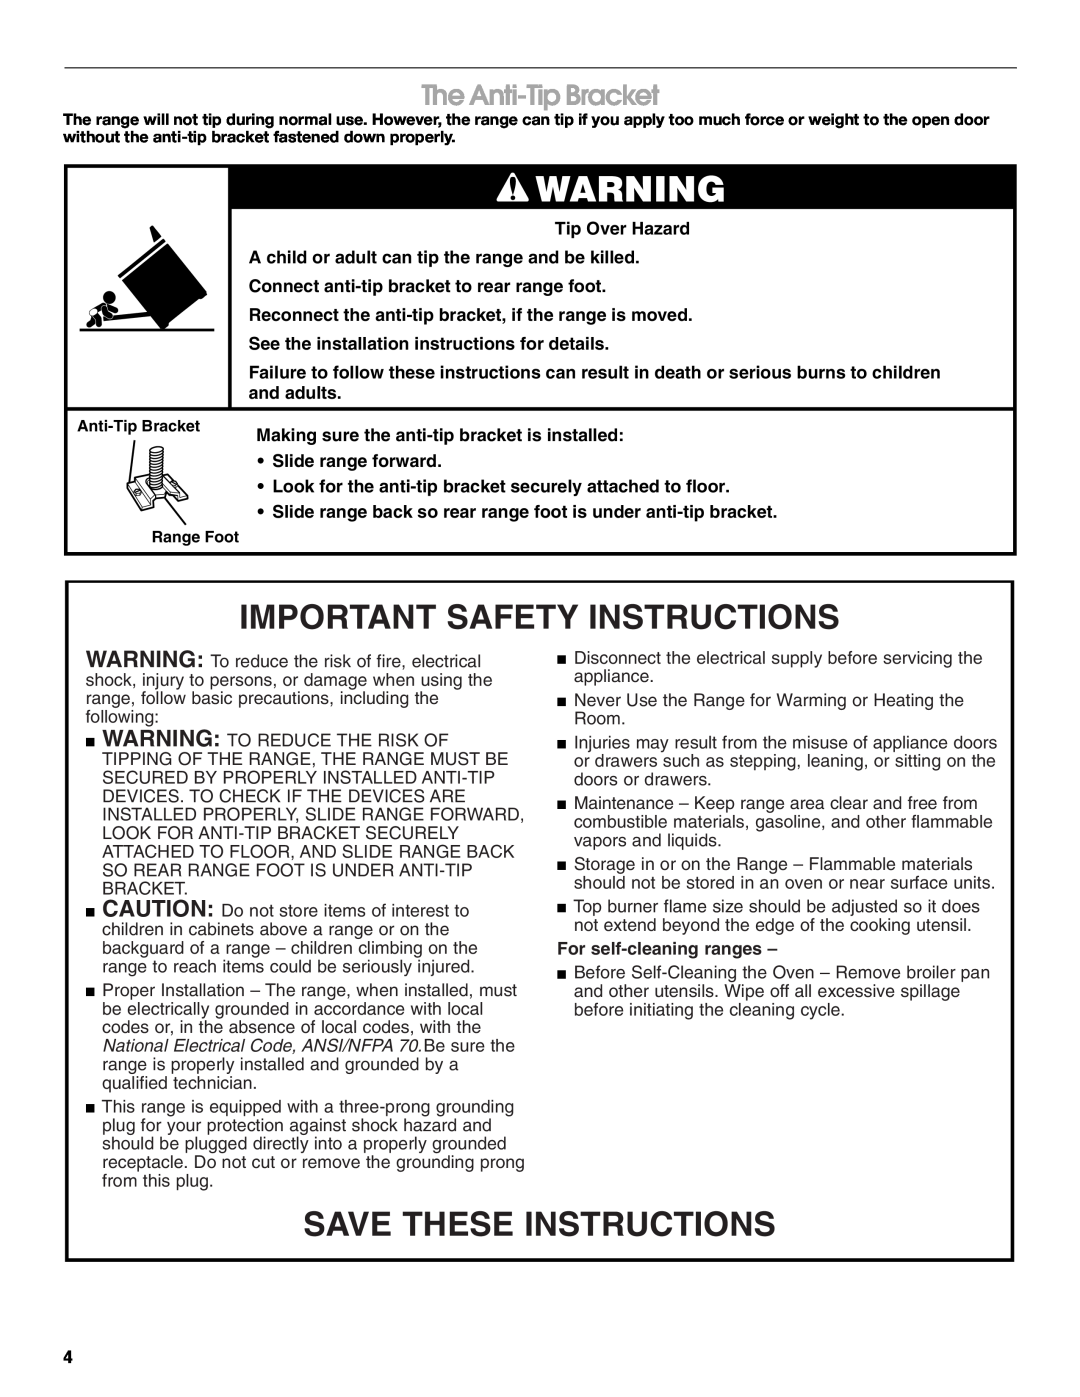 Whirlpool FGP337K0 Important Safety Instructions, Save These Instructions, The Anti-Tip Bracket, For self-cleaning ranges 